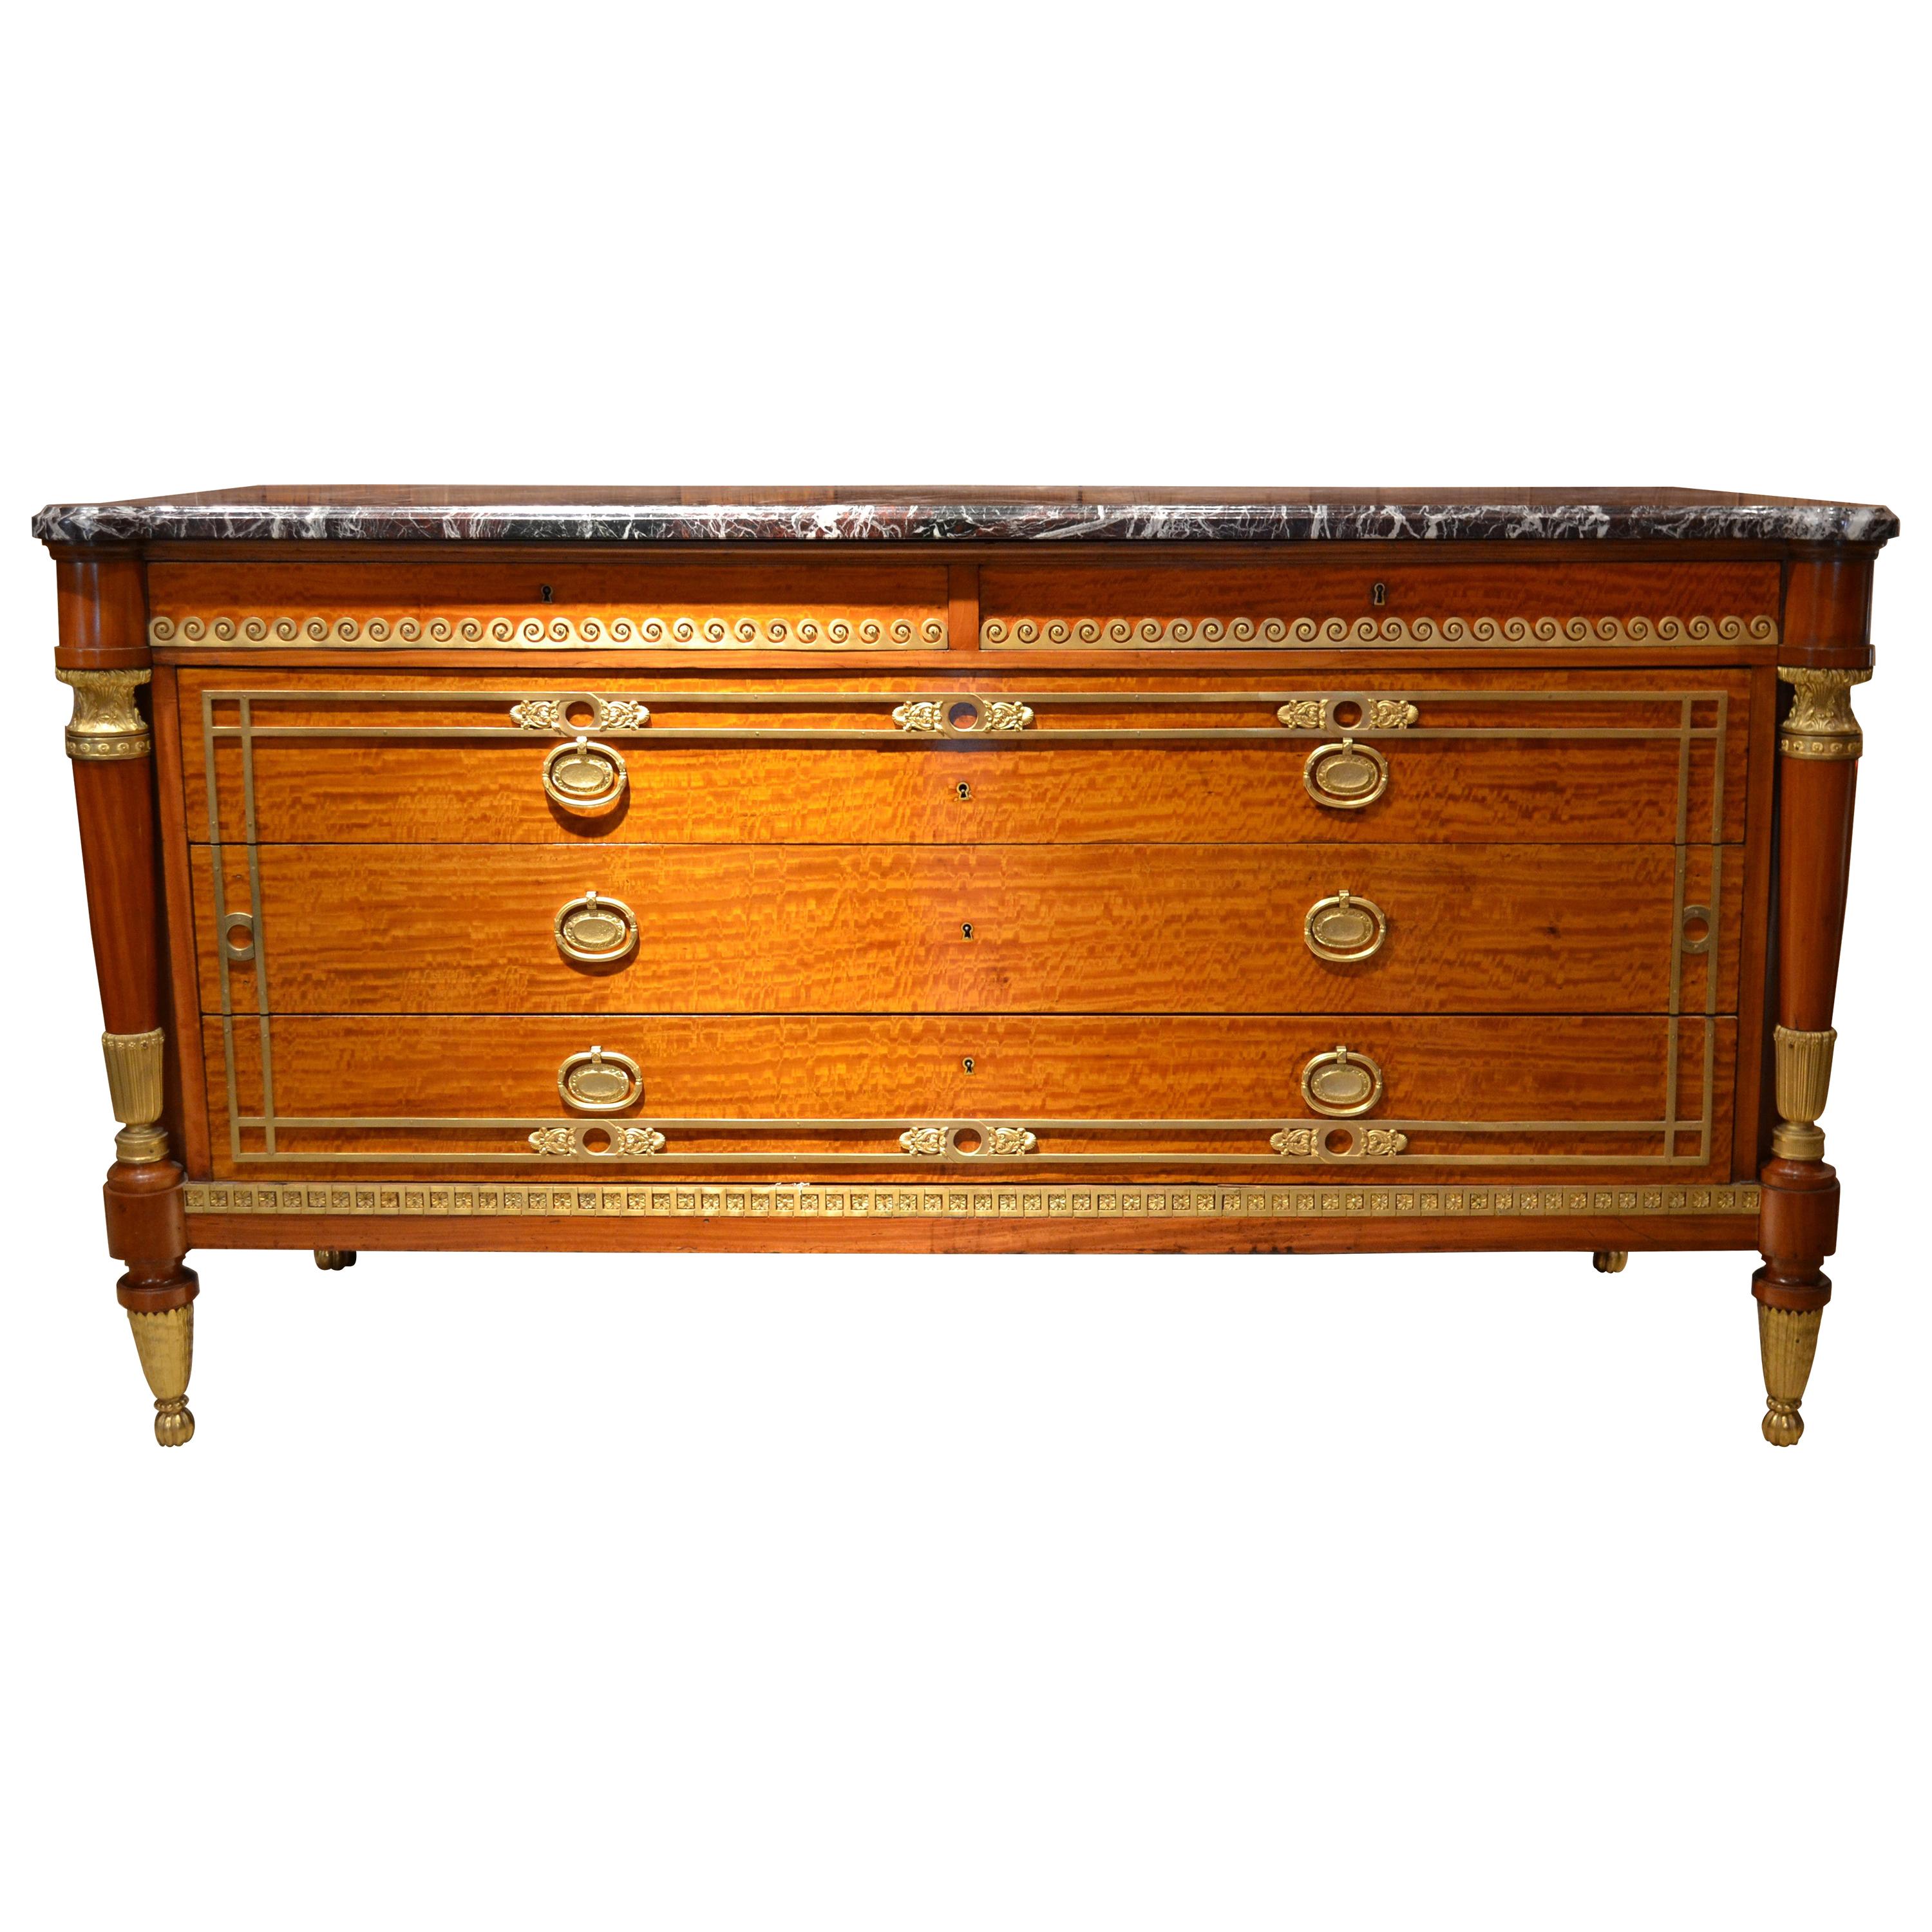 Antique French Satinwood Marble-Topped Commode